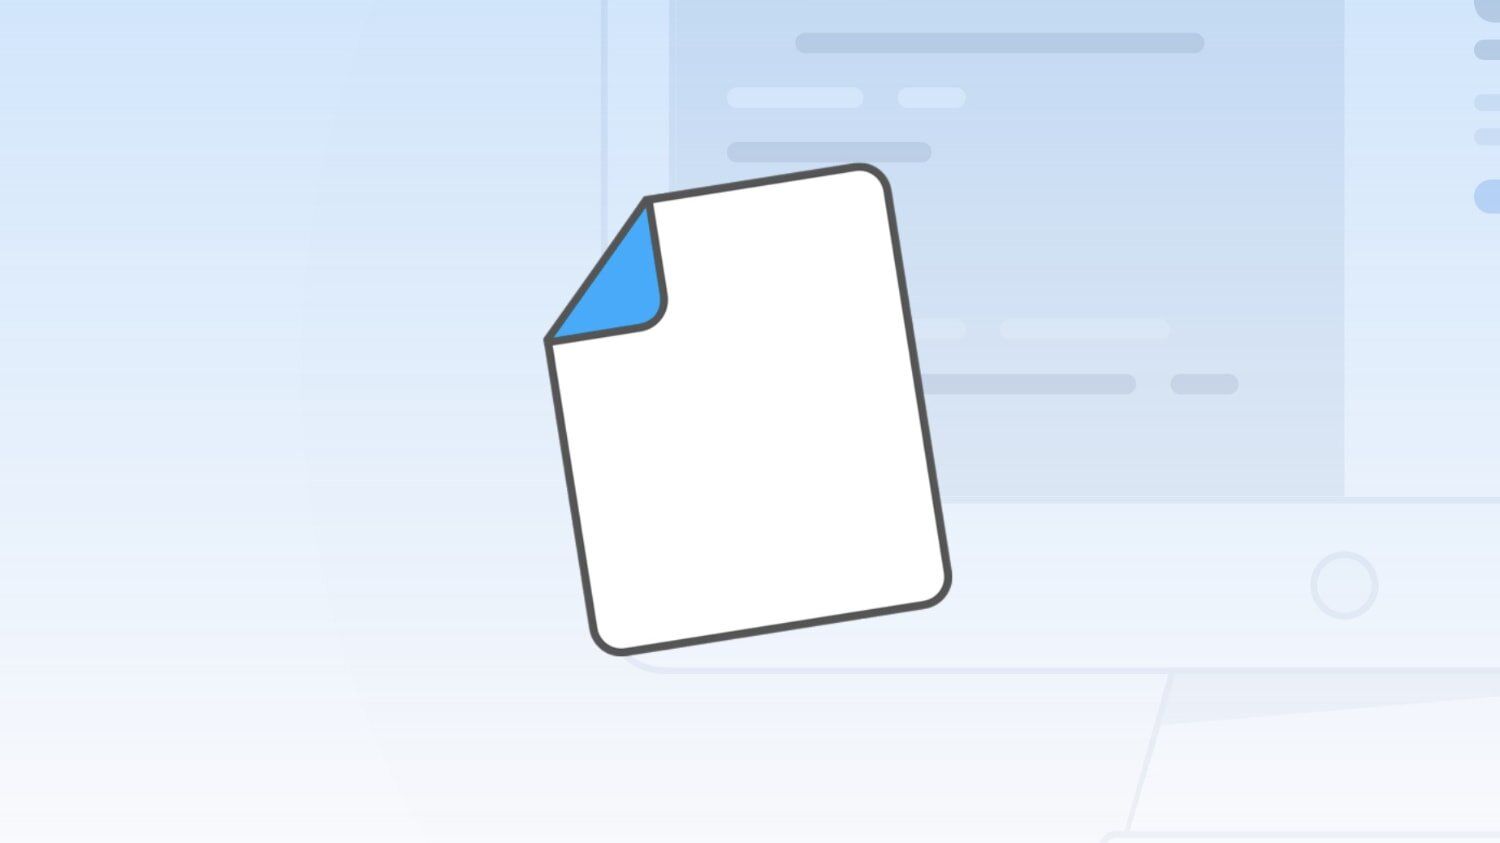 Mac Weekly - FilePane: Get Useful Drag-and-Drop Quick Actions for Files